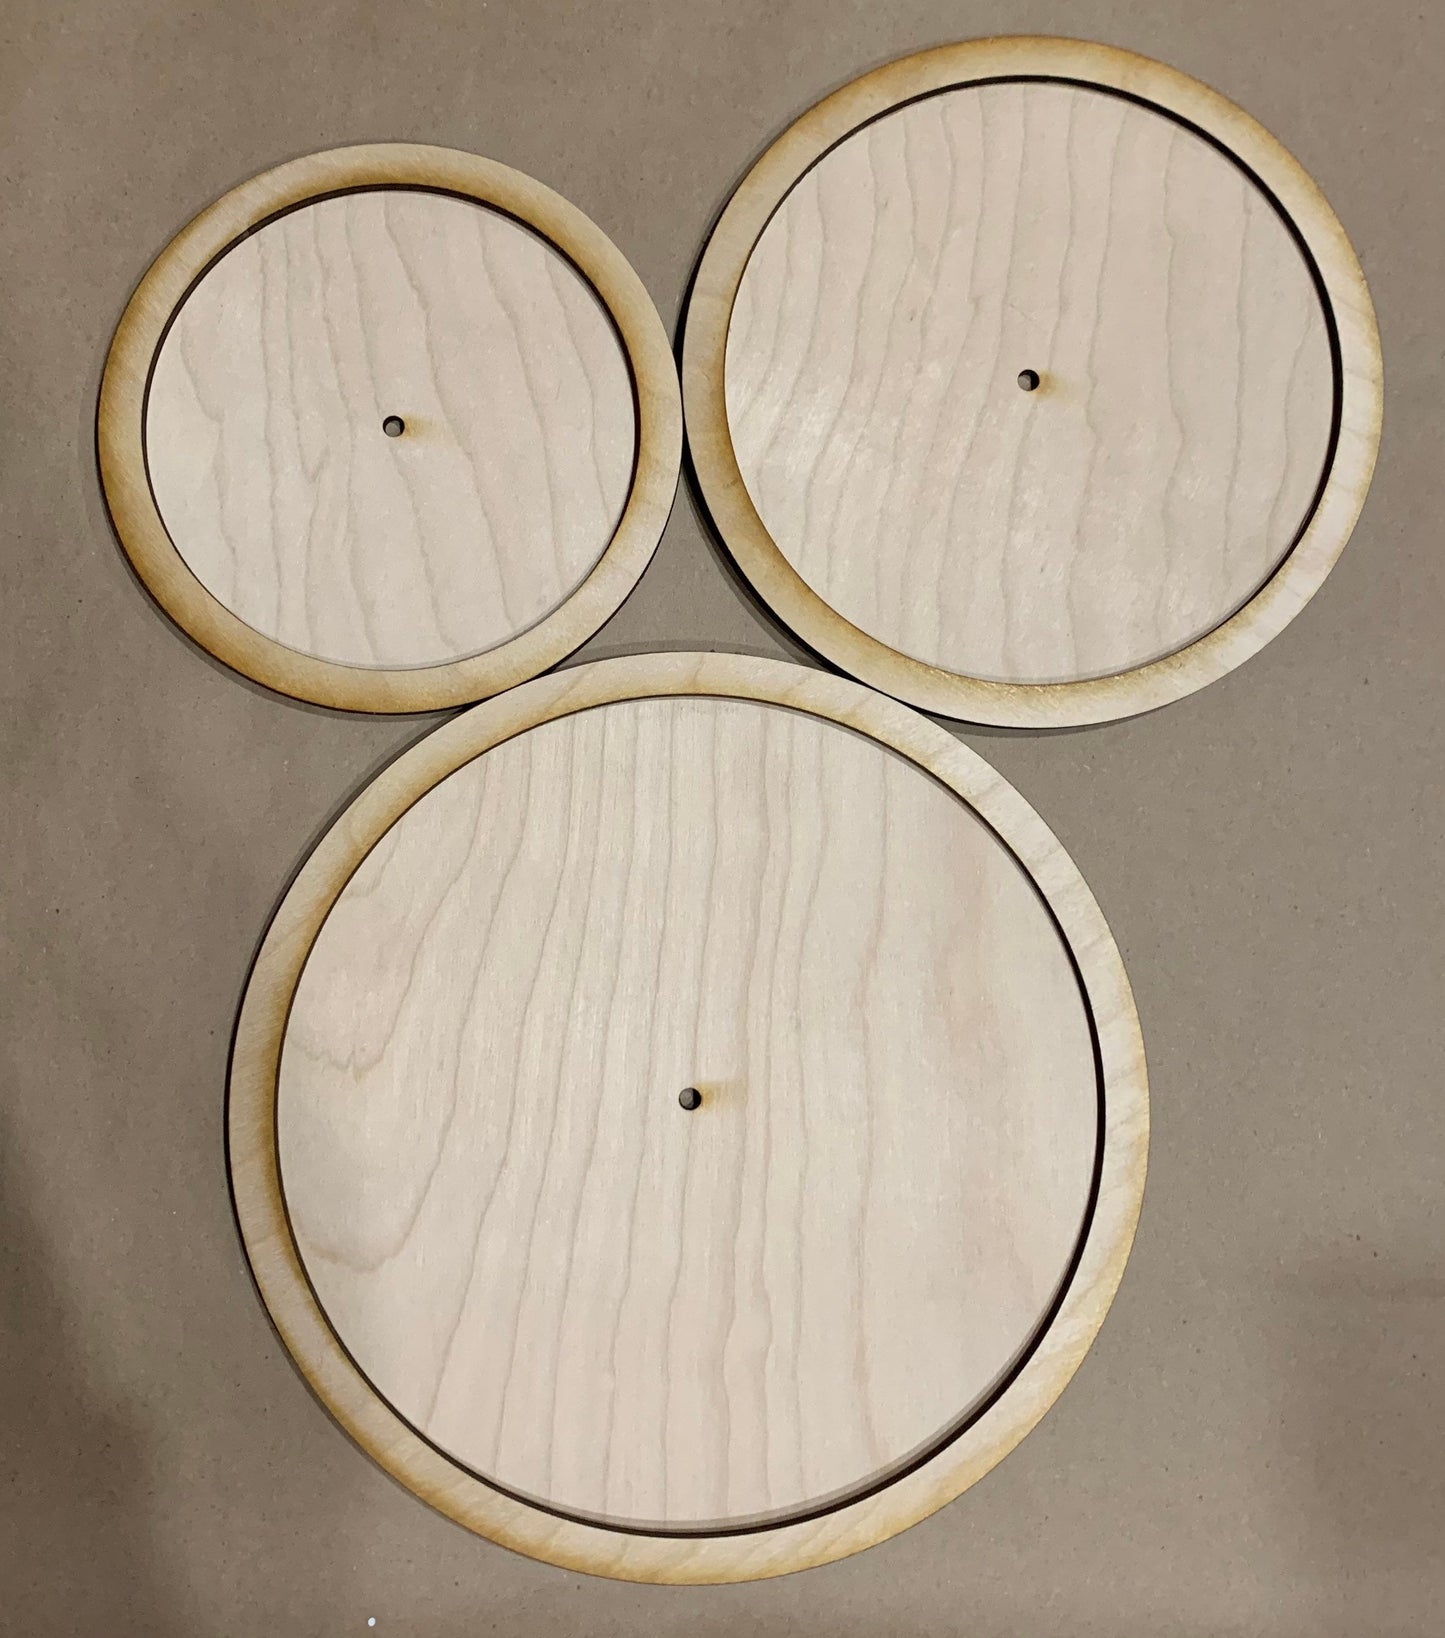 DIY tier tray blanks.Set of 3 Unfinished Wood Plaques with rings. Please see description - Hardware not included and assembly req